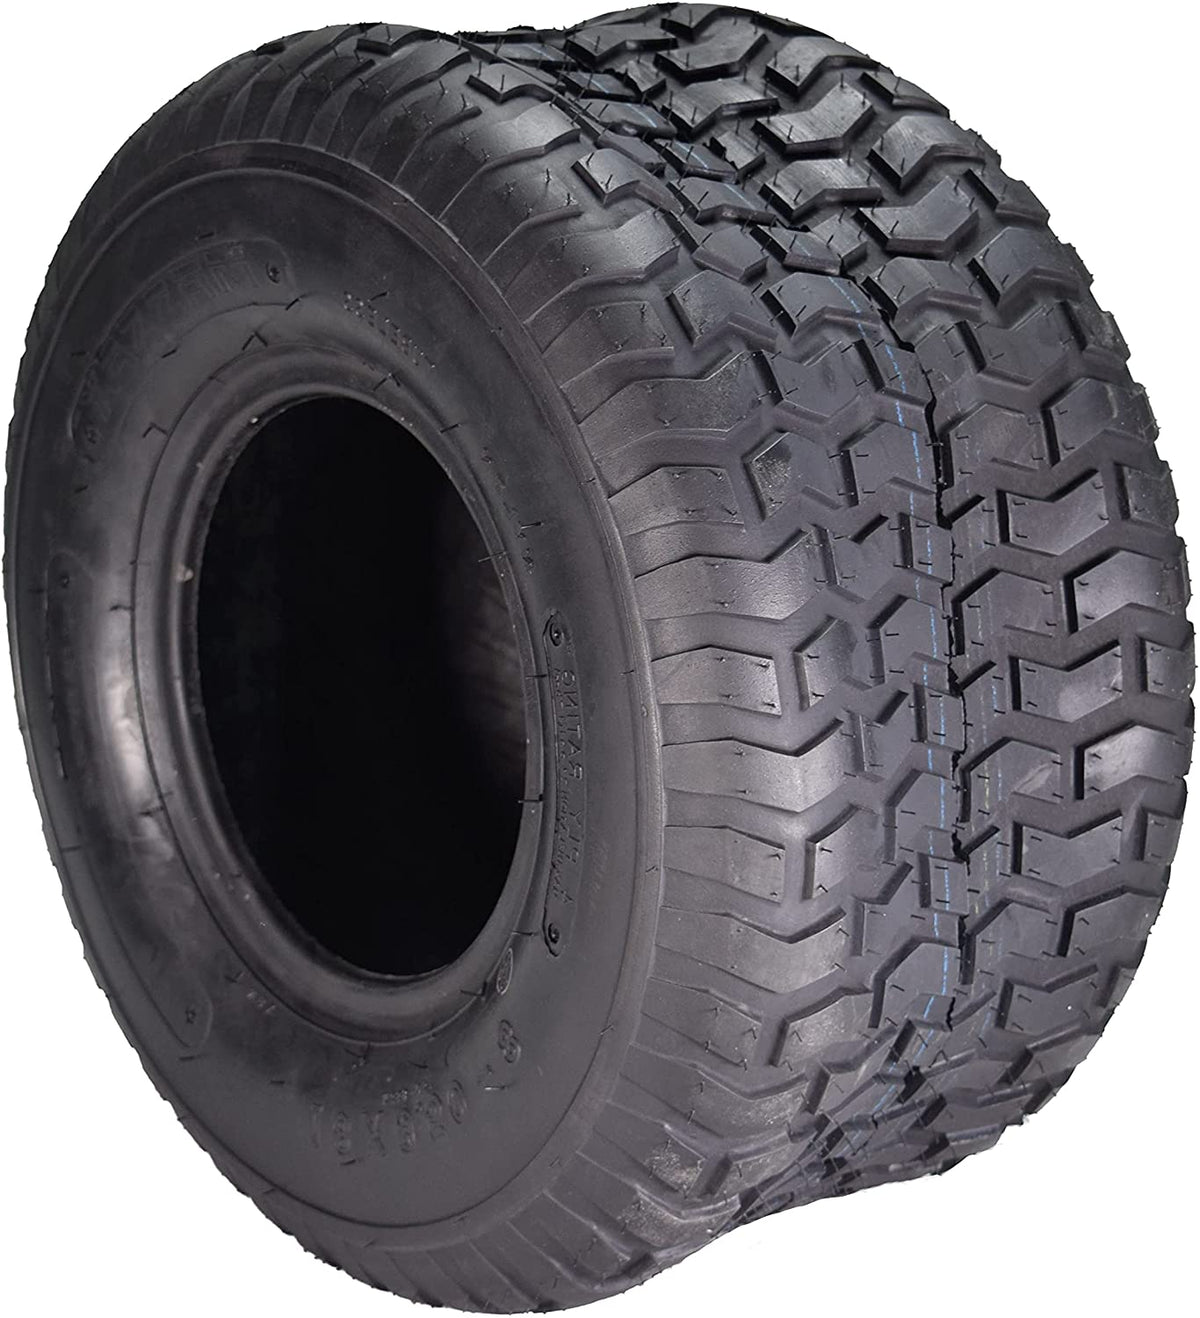 MASSFX 18x9.50-8 Lawn Mower Tires 4ply